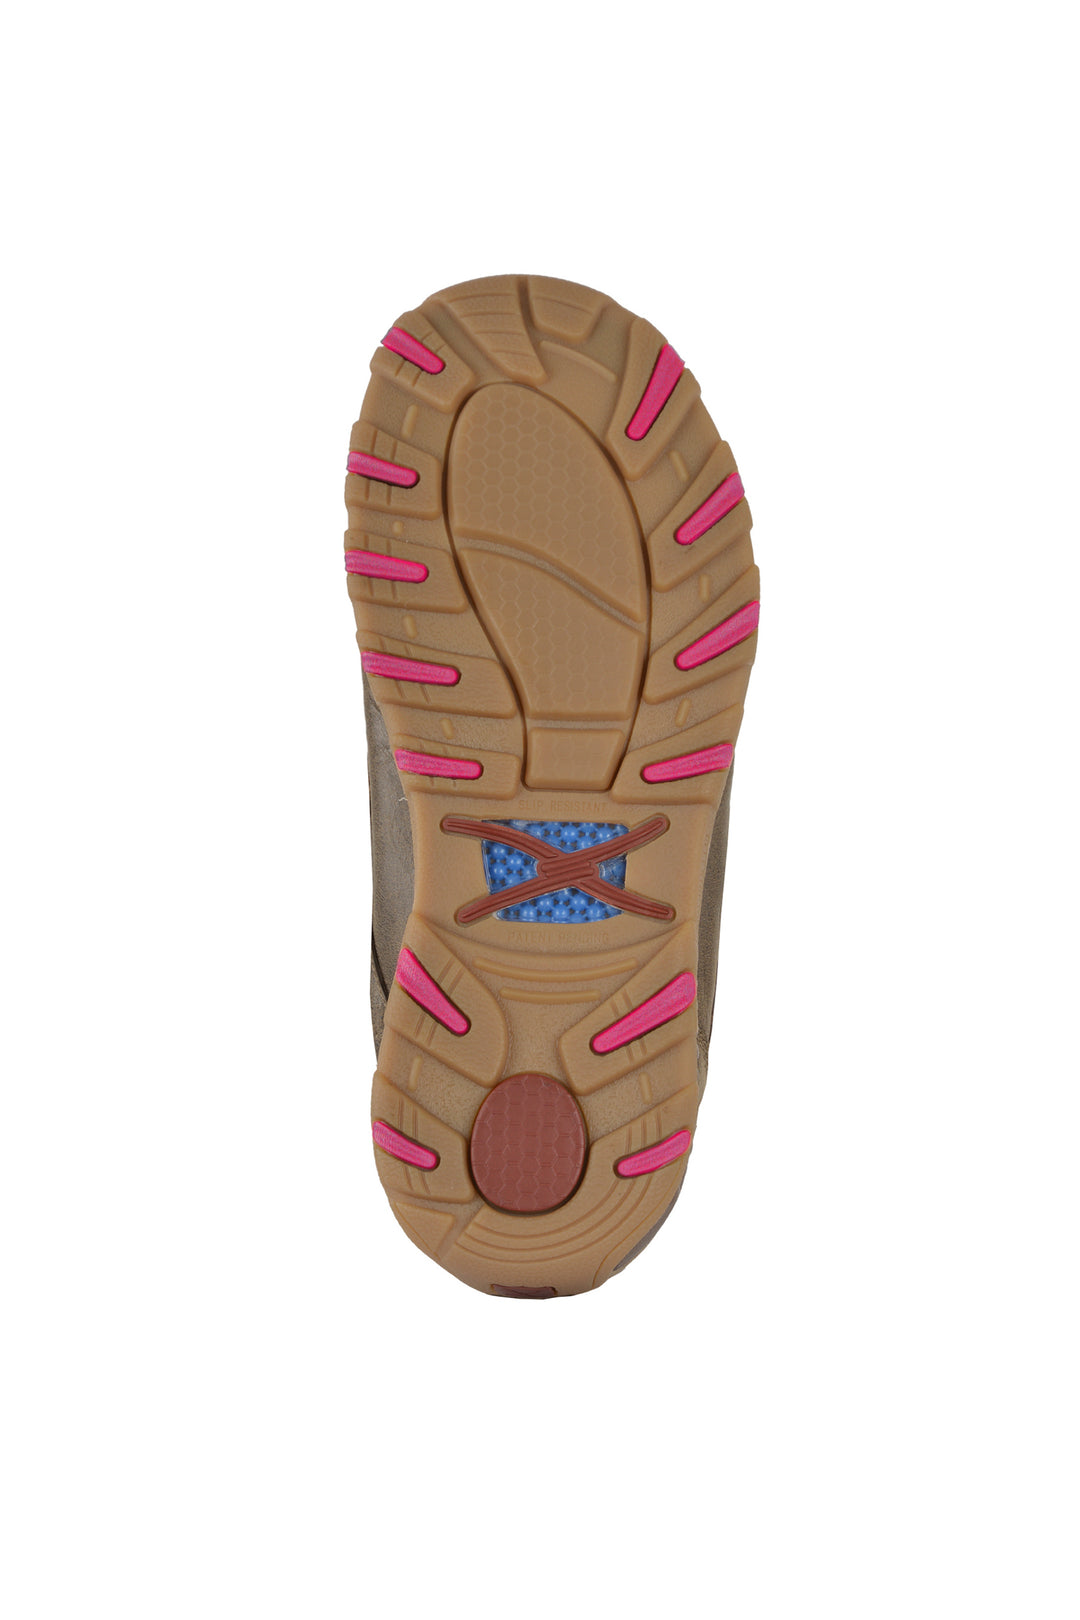 Twisted X - Womens Tooled Cell Stretch Slip On